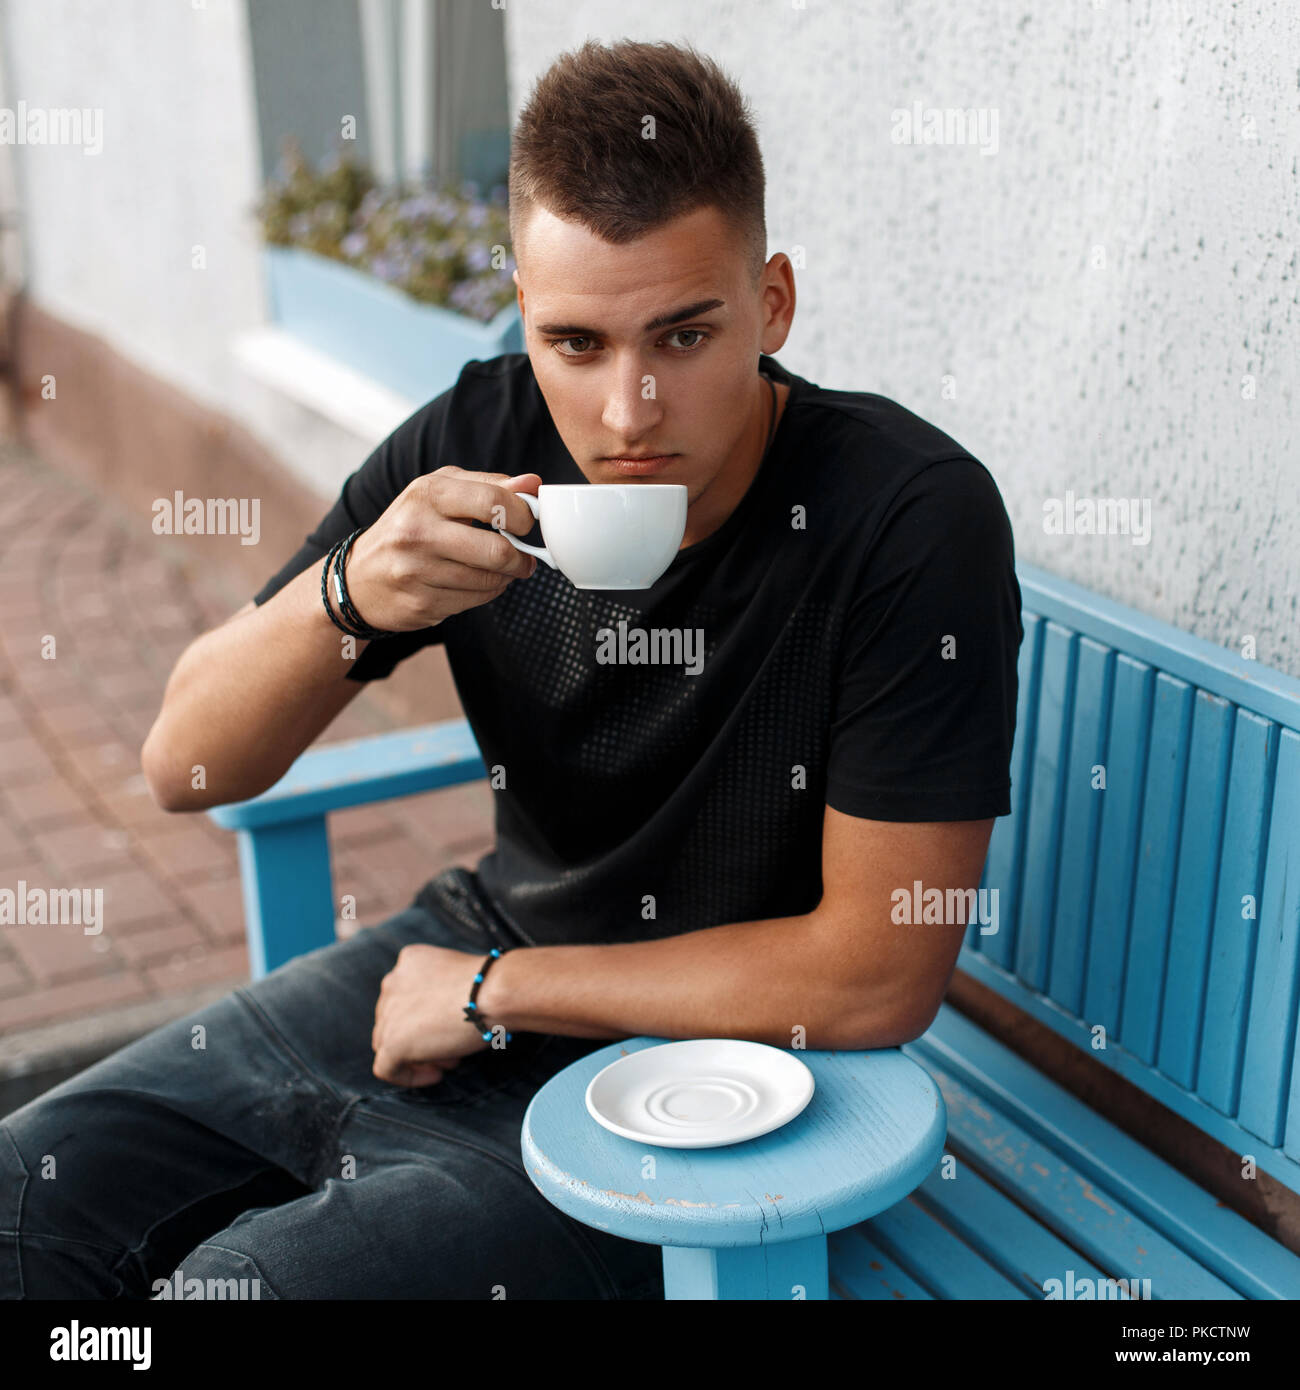 Handsome man with the hairstyle in a black shirt sits on a blue bench and drink coffee. Stock Photo